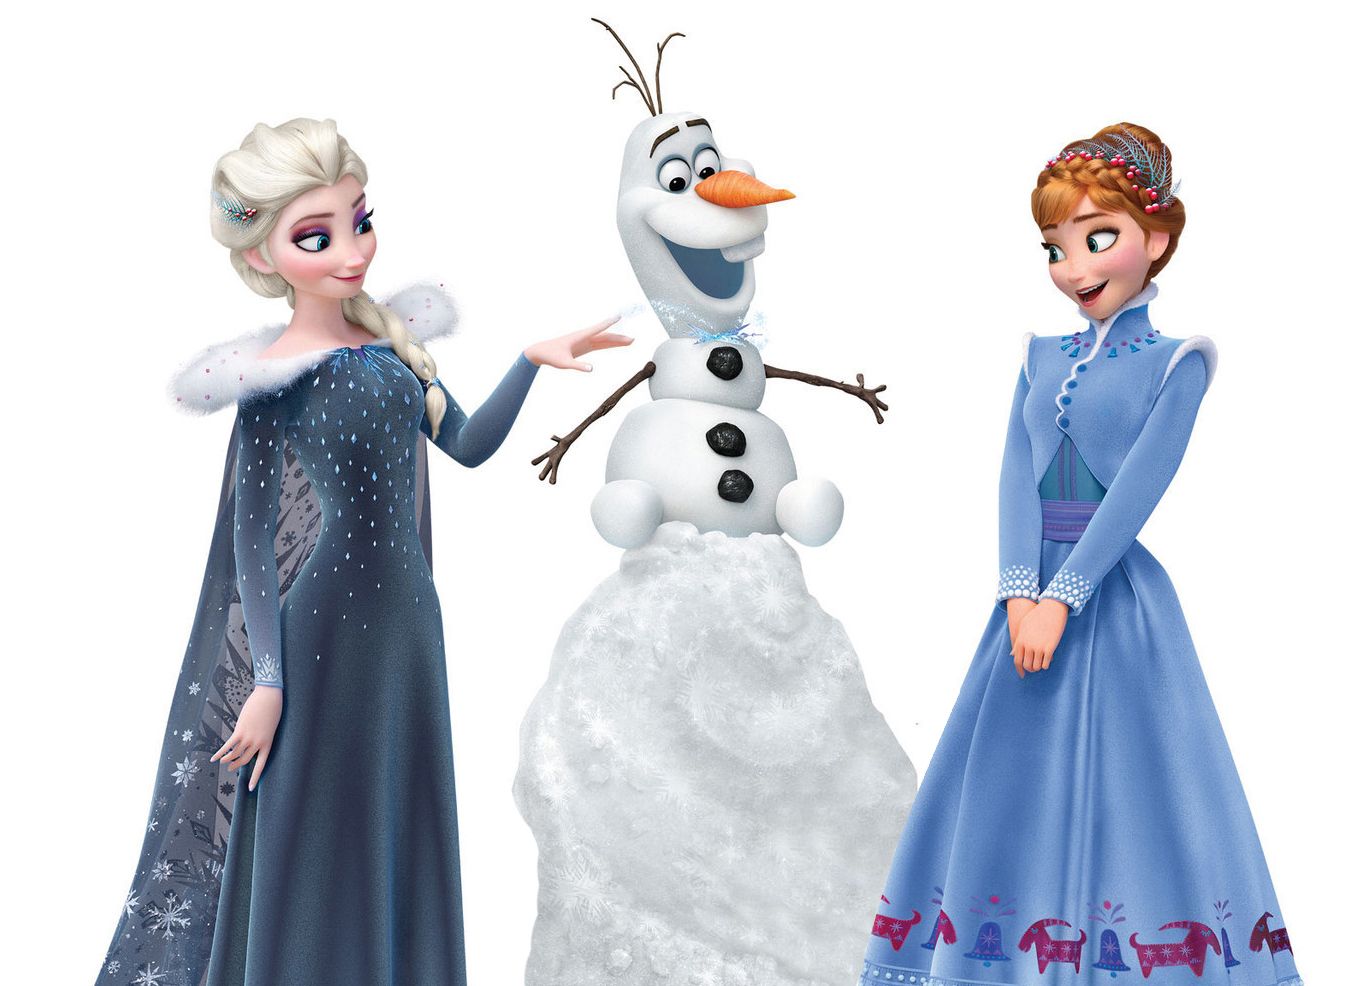 New big image of Olaf's Frozen Adventure main characters